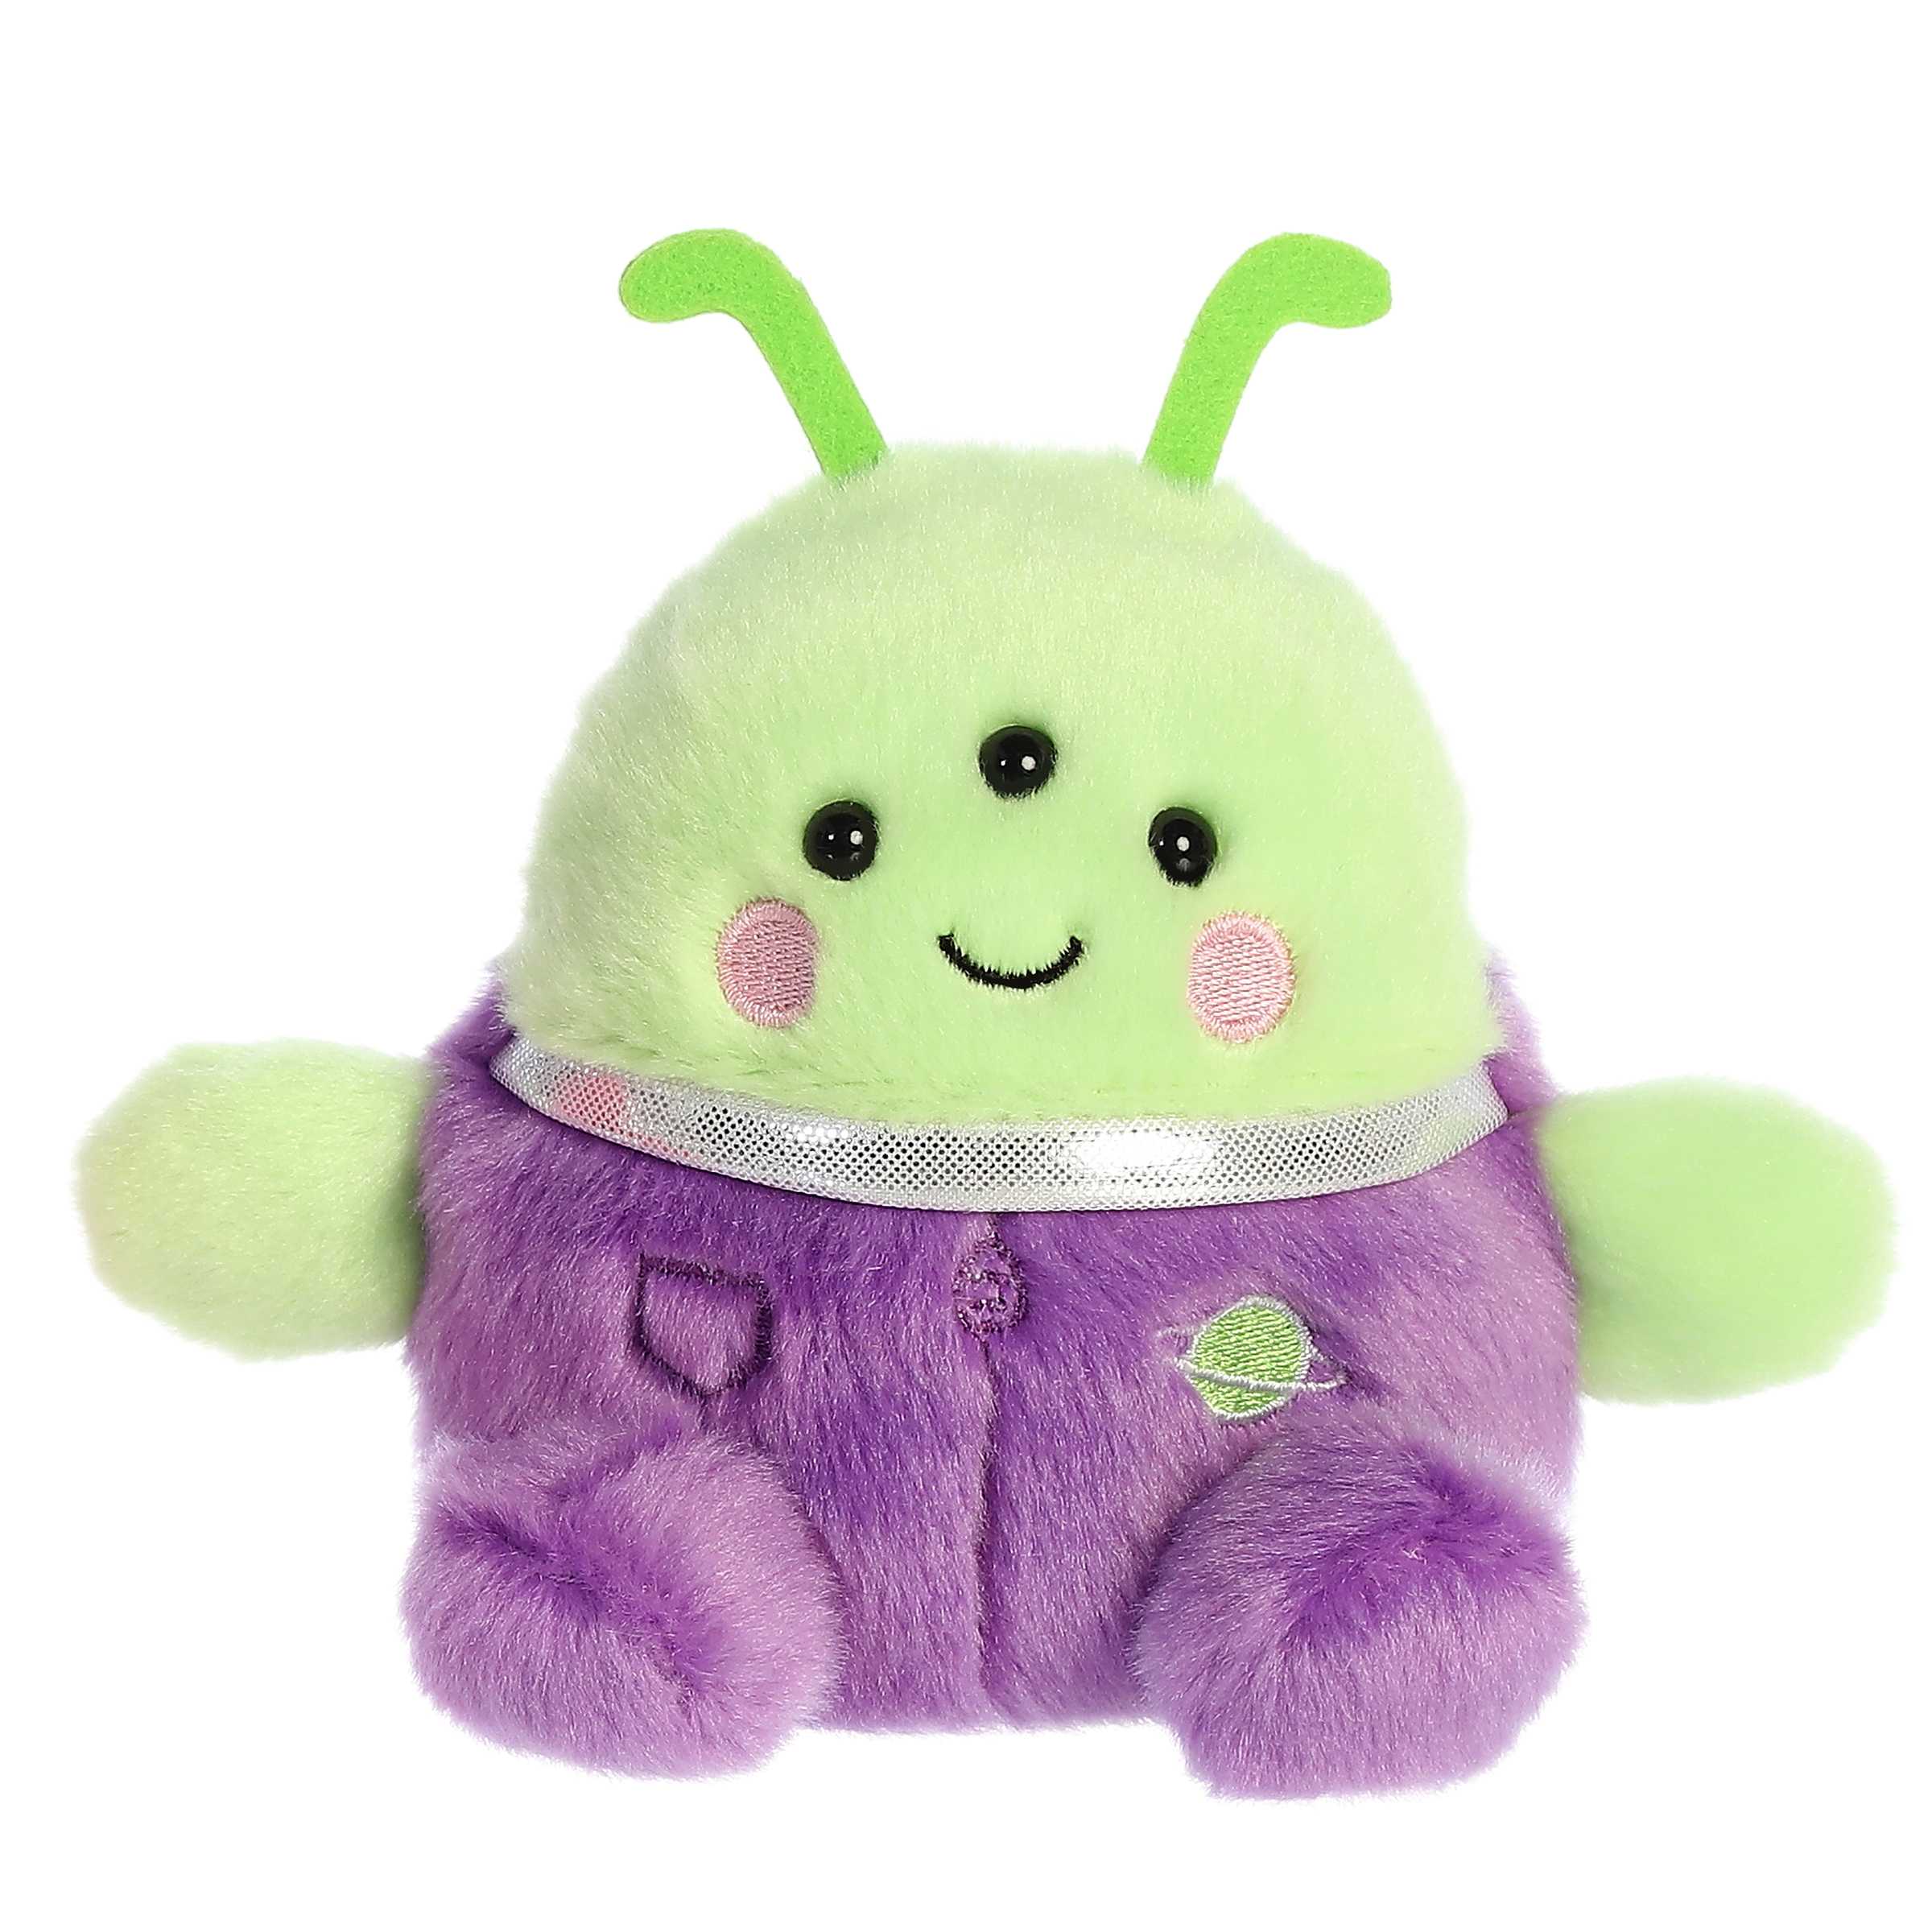 Zorg the Green Alien plush has a bright lime-green body and deep purple spacesuit, three beaming eyes and rosy-cheeks!